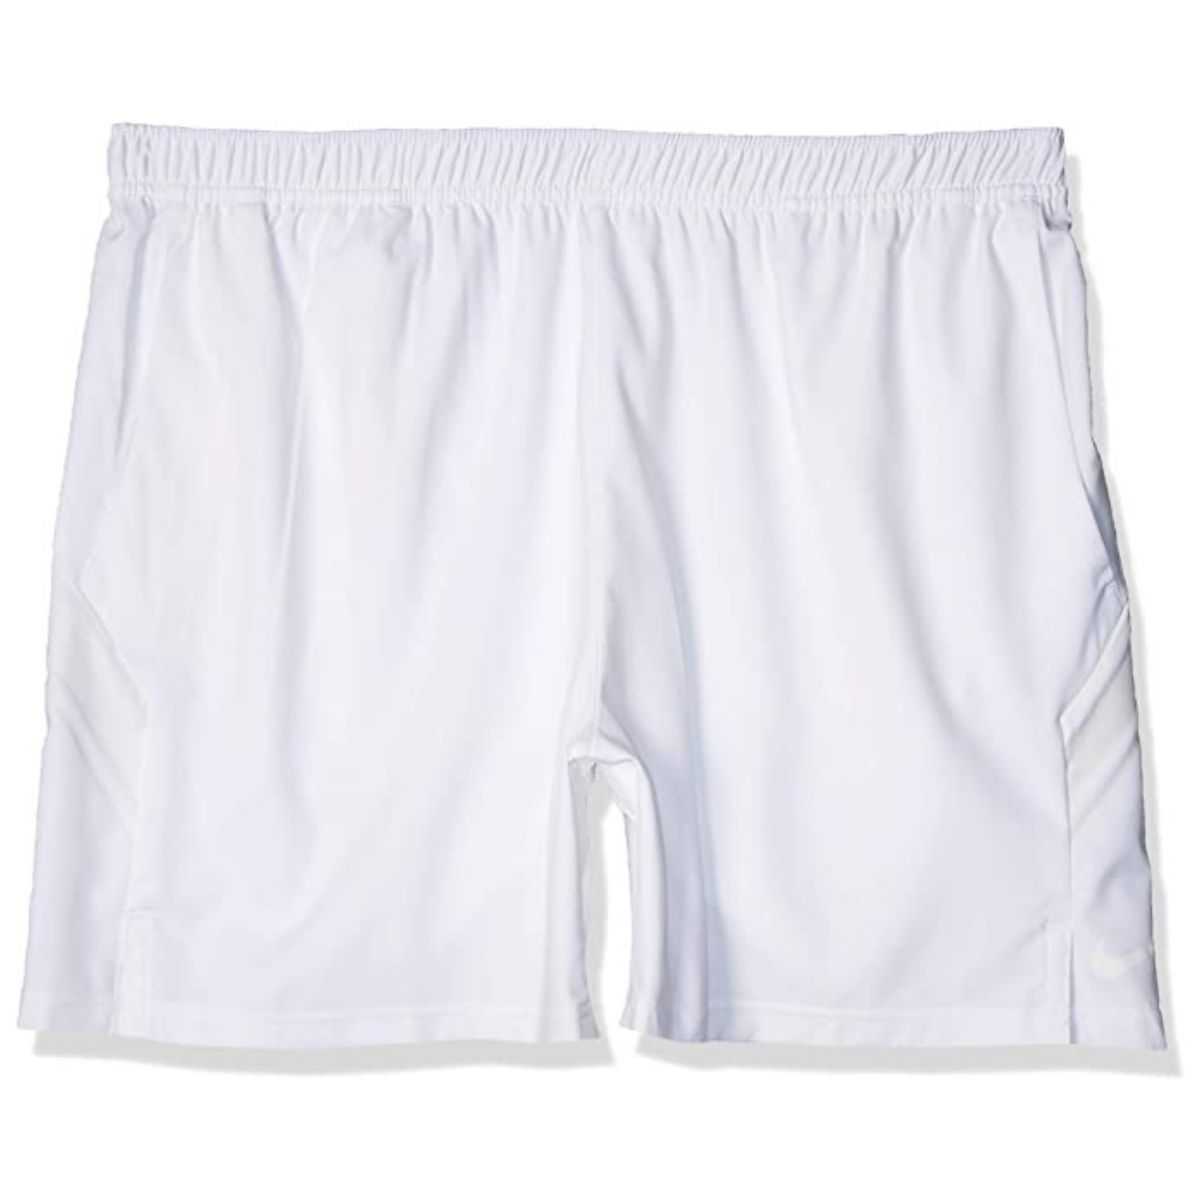 The Best Tennis Shorts Options: Nike Court Dry 7 Inch Tennis Shorts